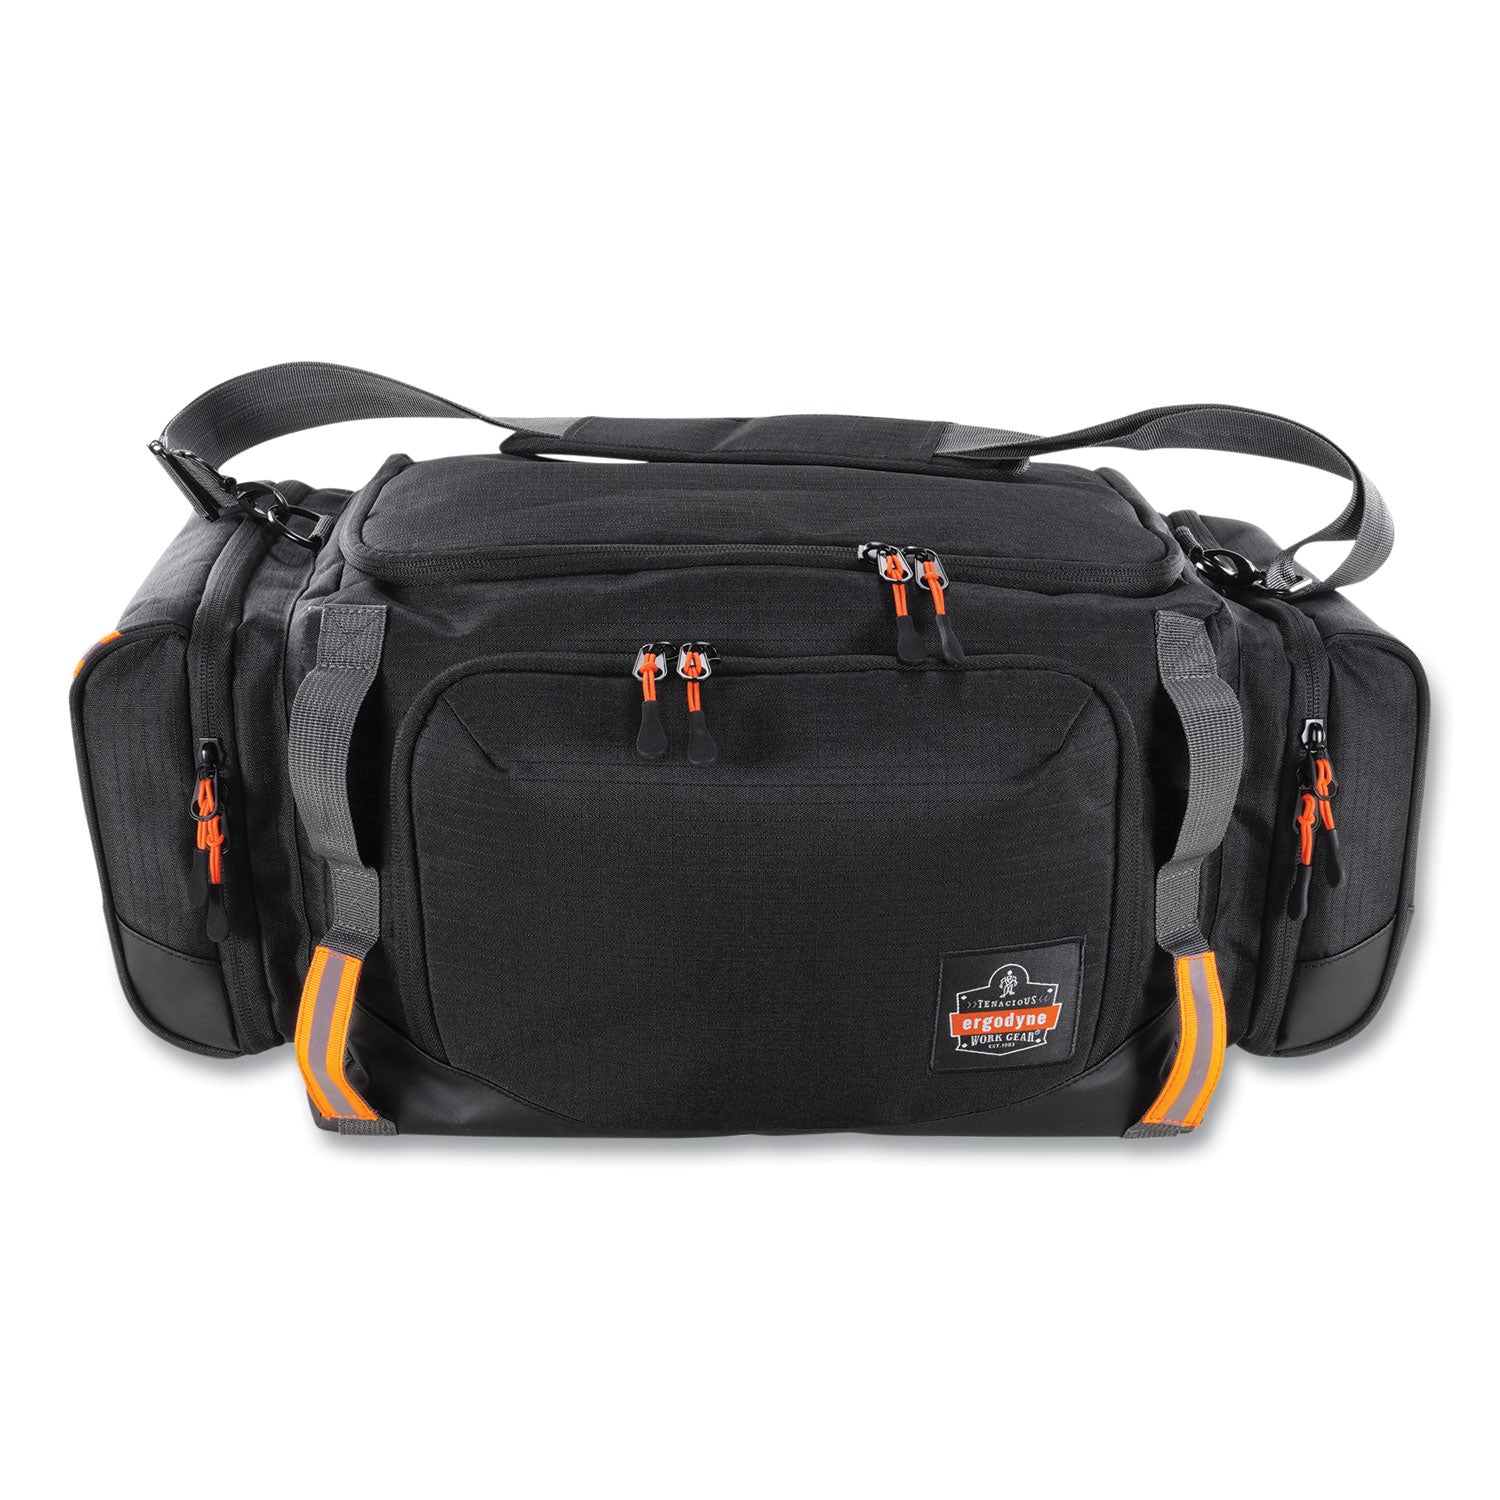 arsenal-5189-ppe-duffel-bag-12-x-22-x-9-black-ships-in-1-3-business-days_ego13189 - 1